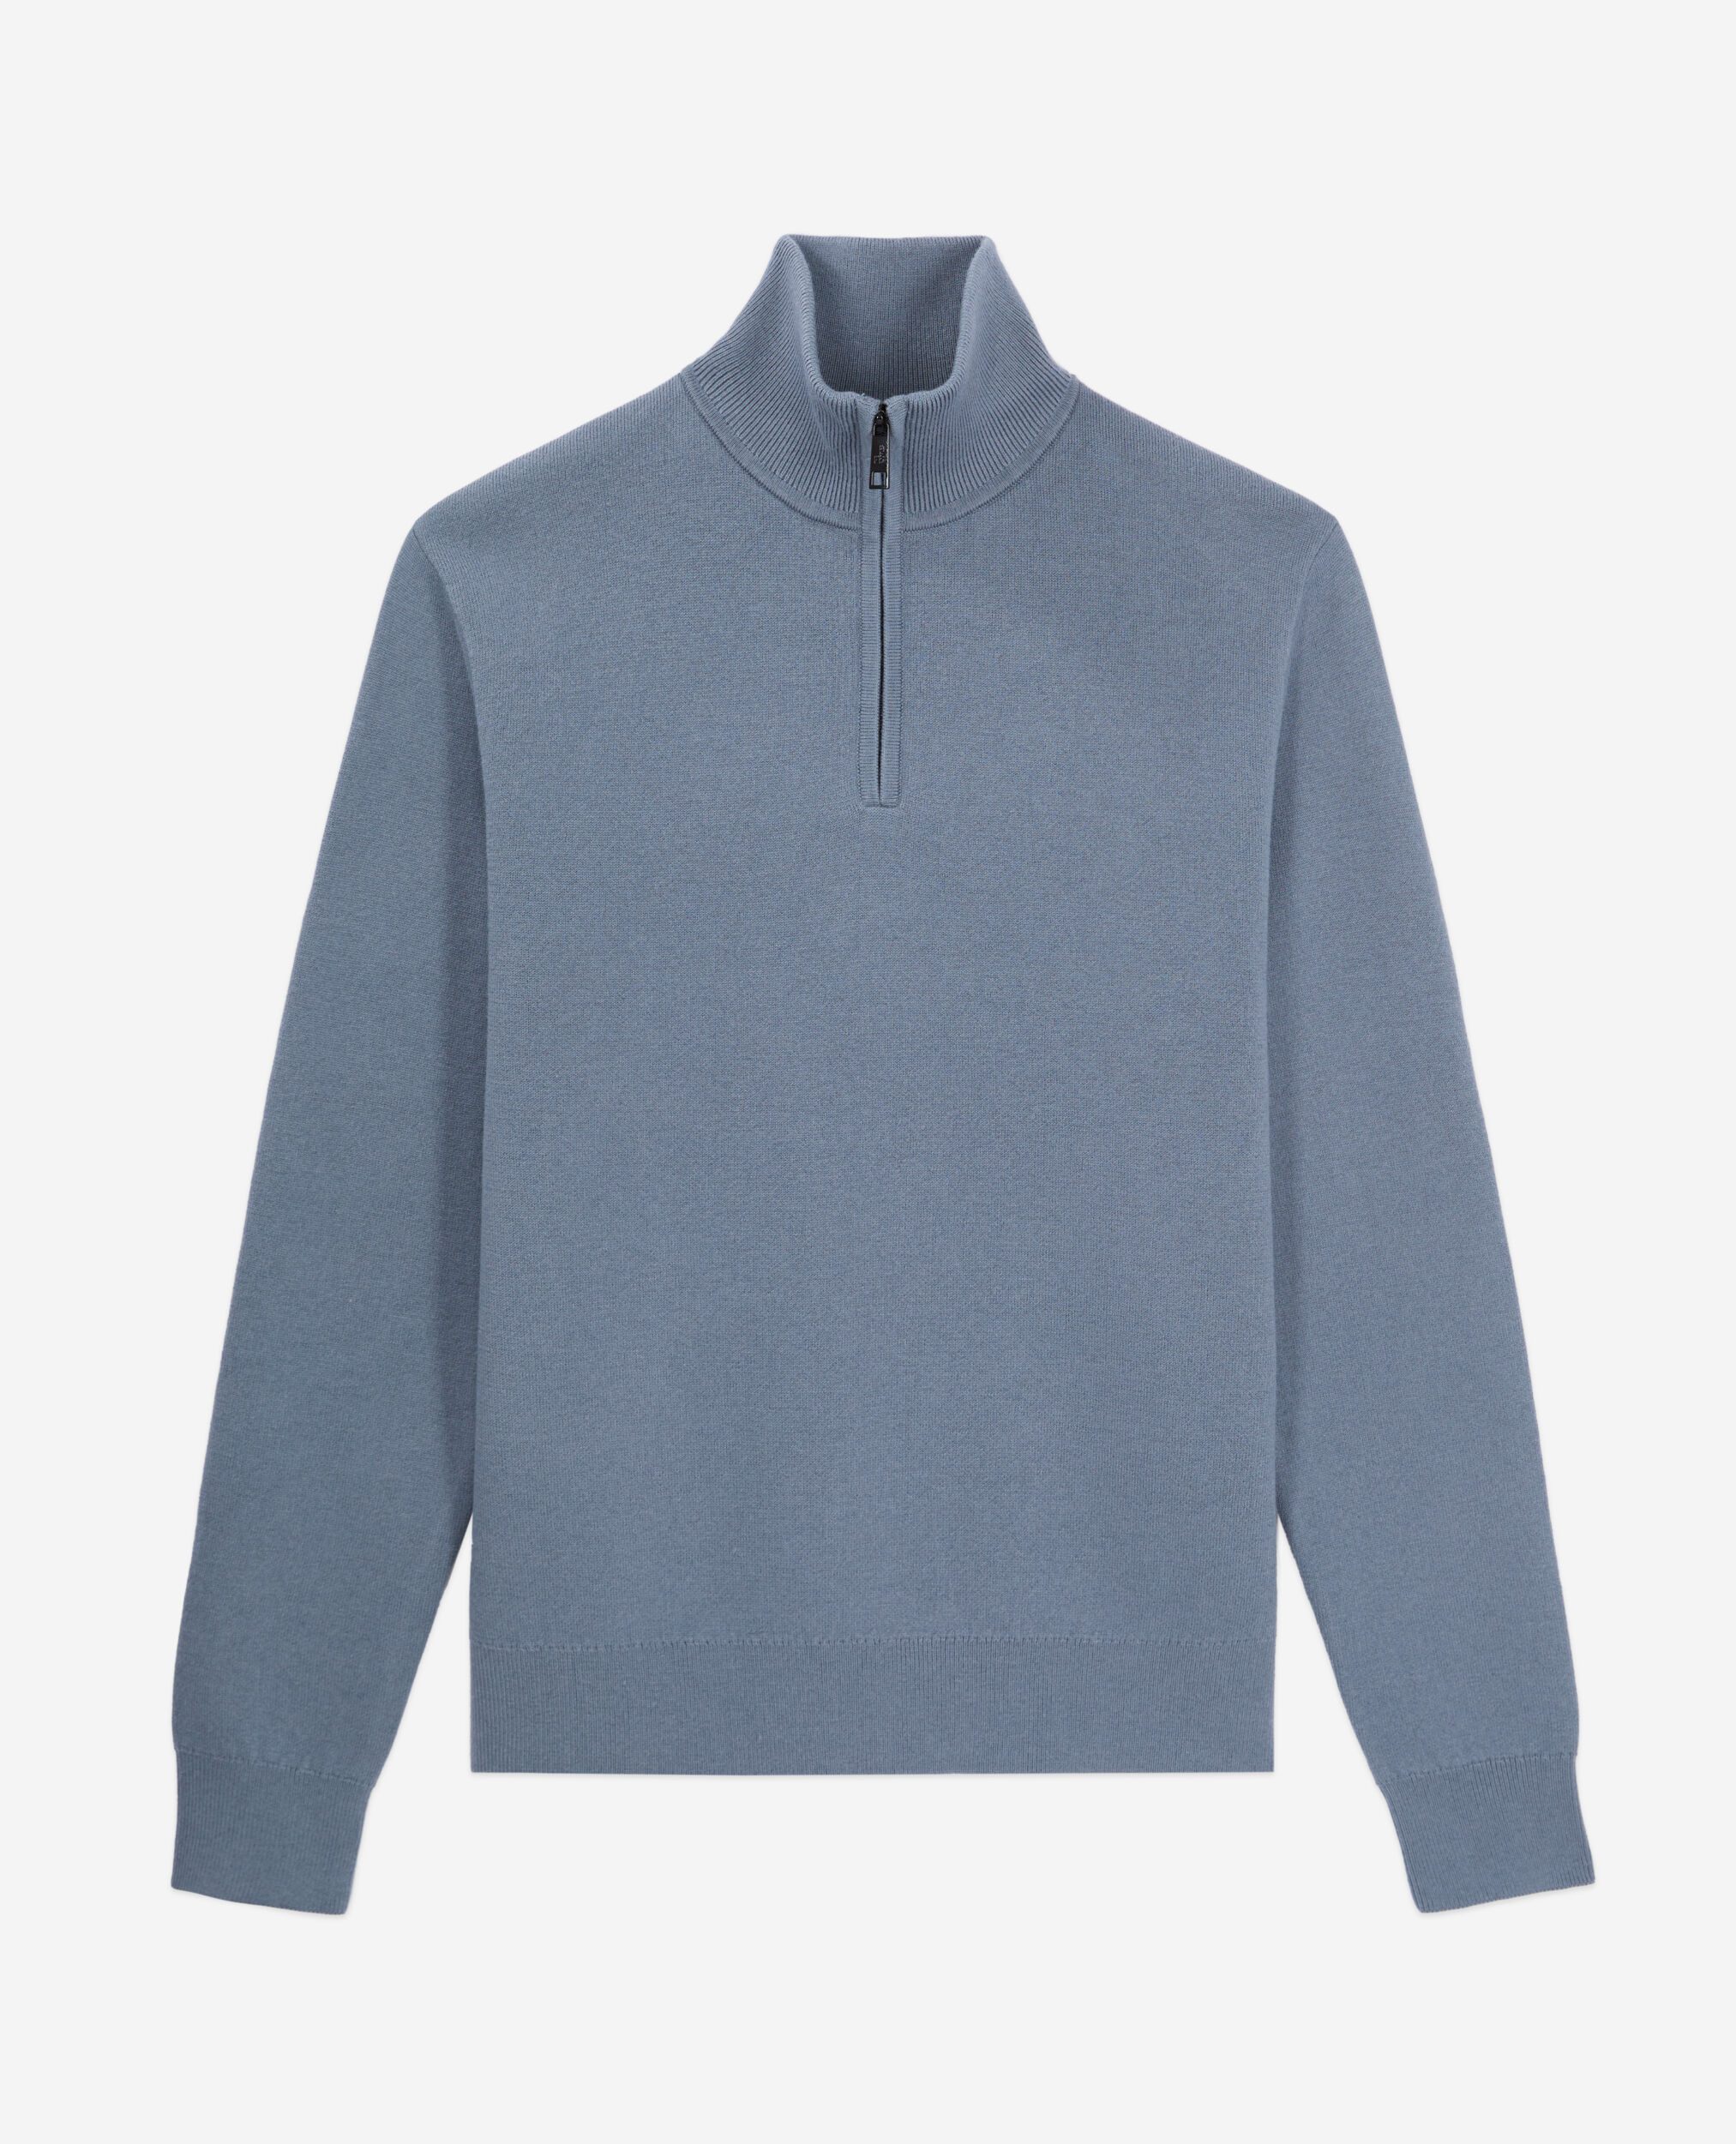 Blue sweater with debossed logo, BLUE GREY, hi-res image number null